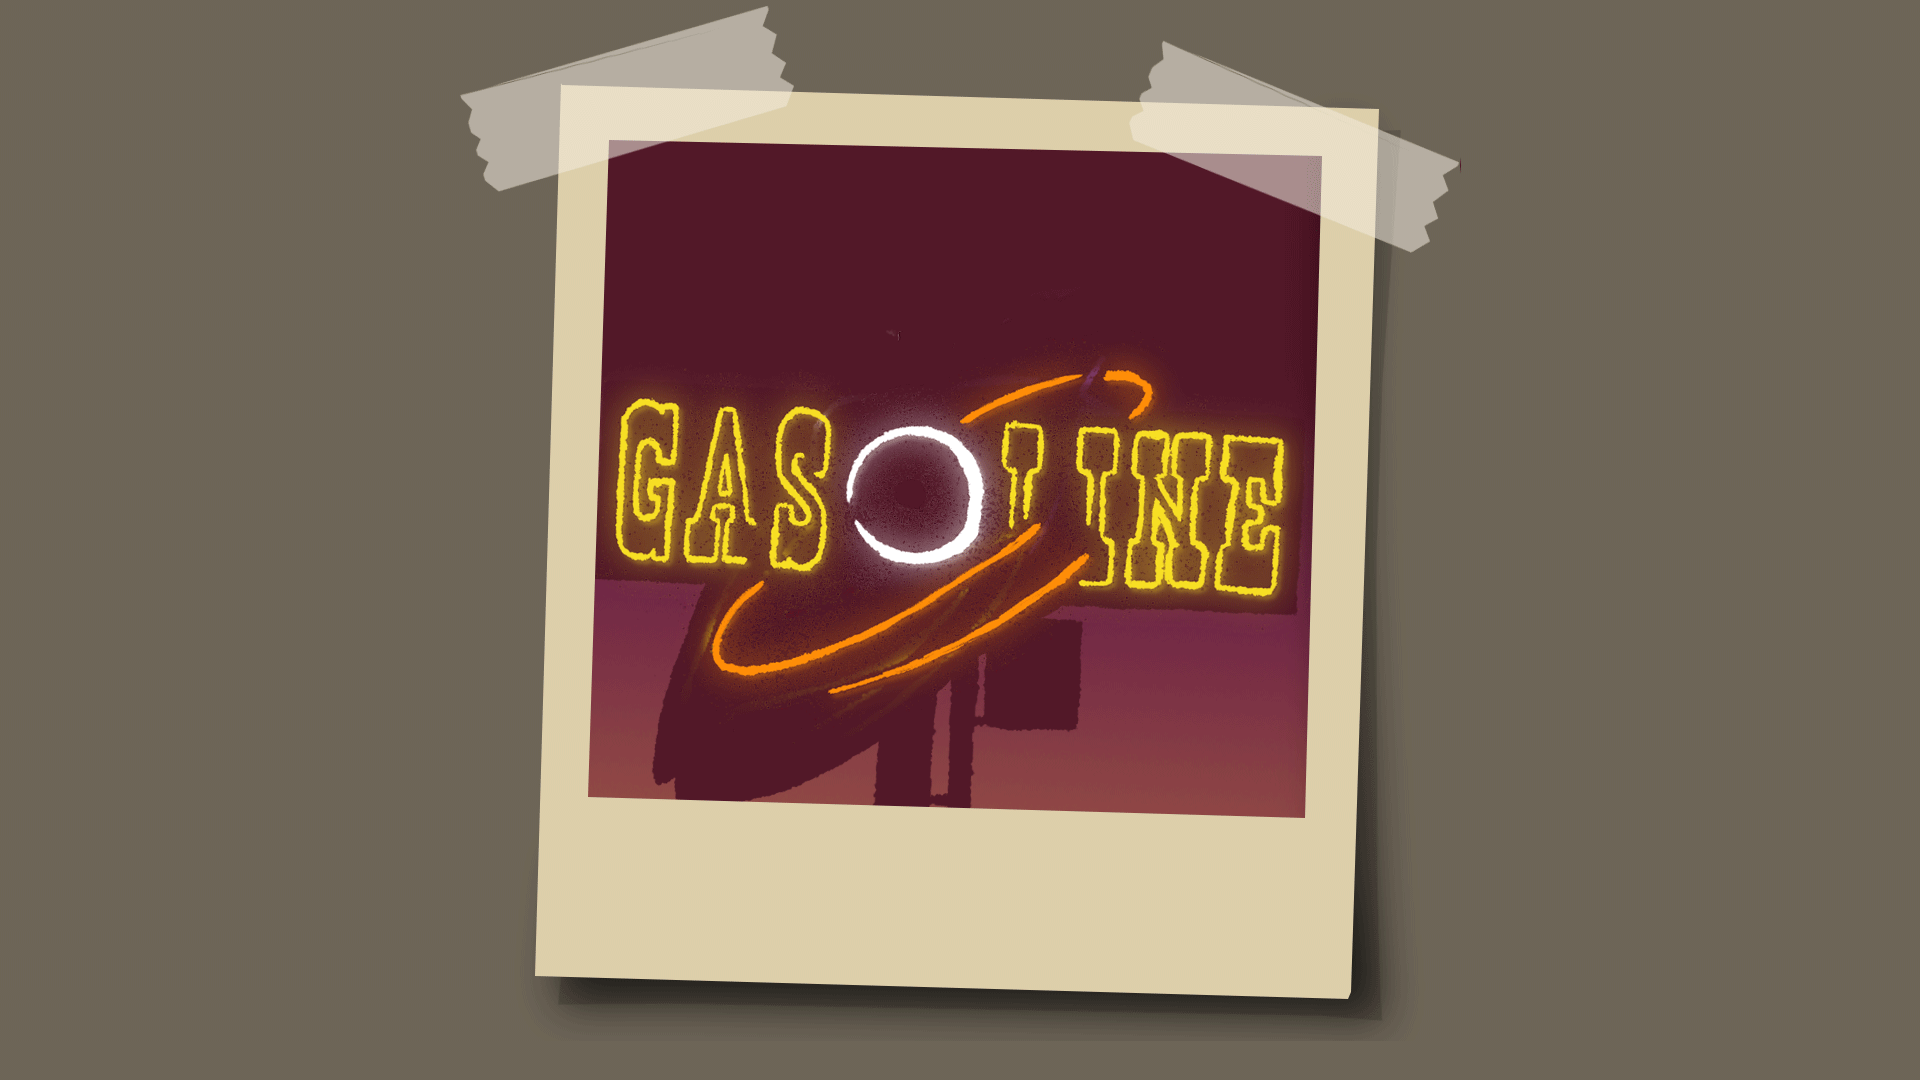 Icon for Fuel